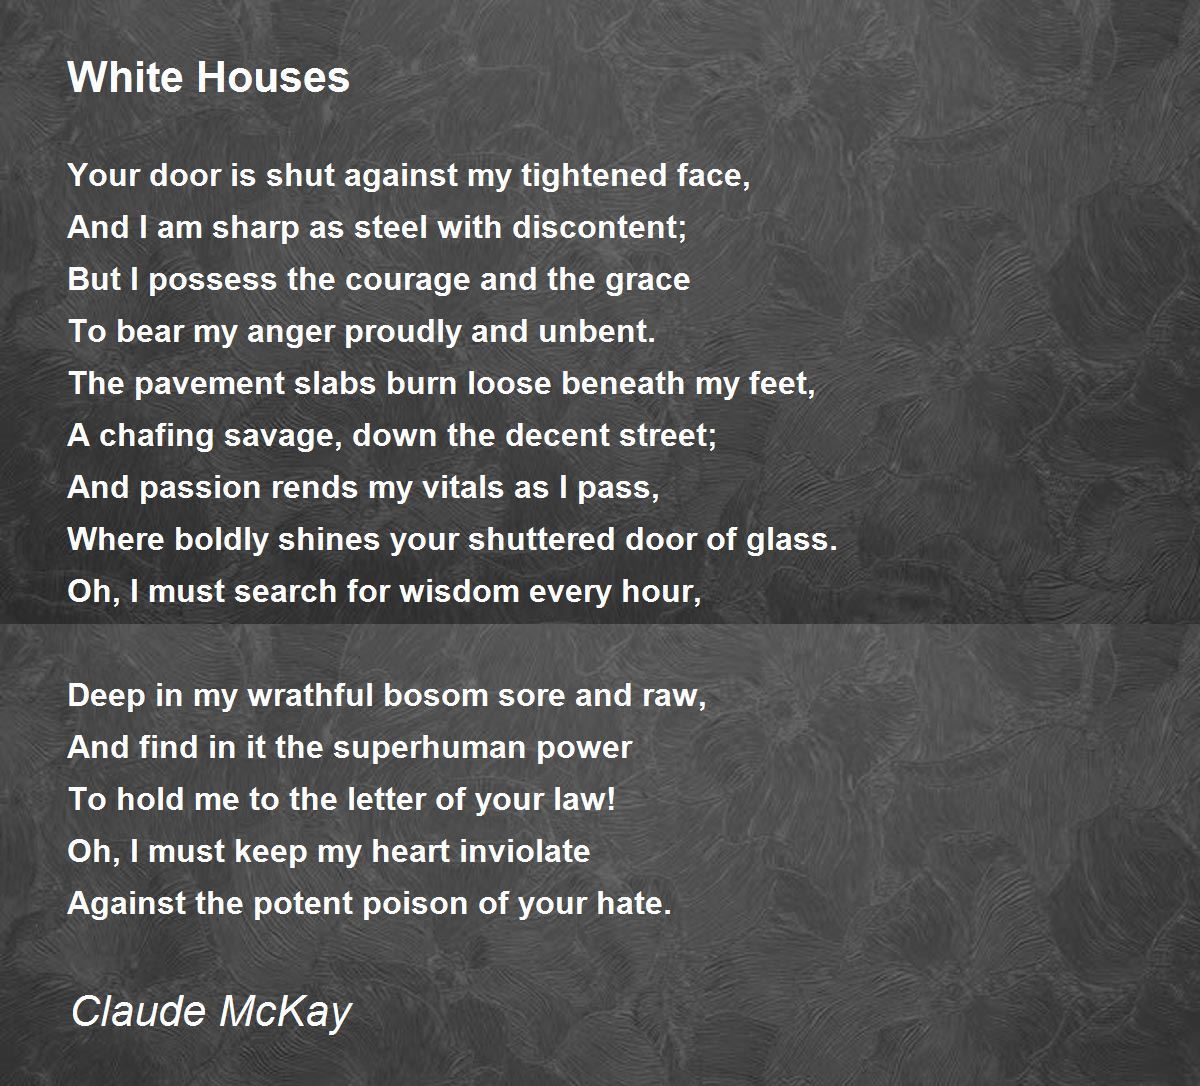 White Houses Poem by Claude McKay - Poem Hunter